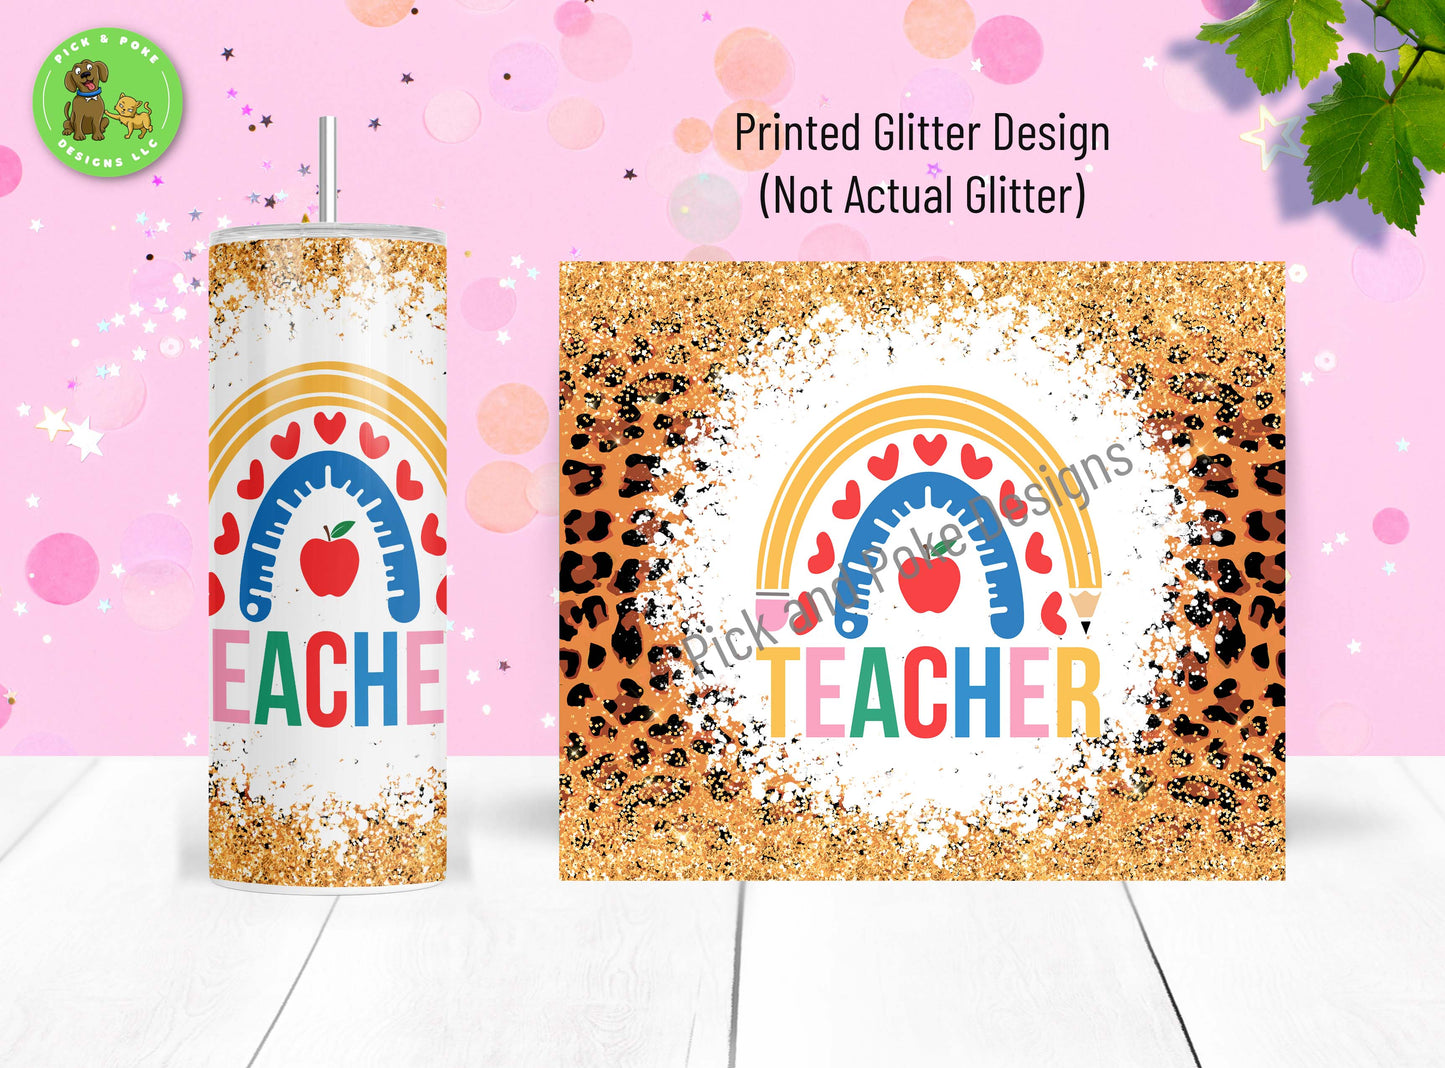 Glitter Cheetah Rainbow tumbler has a sublimated design printed on the tumbler and comes with a reusable straw and plastic lid. 